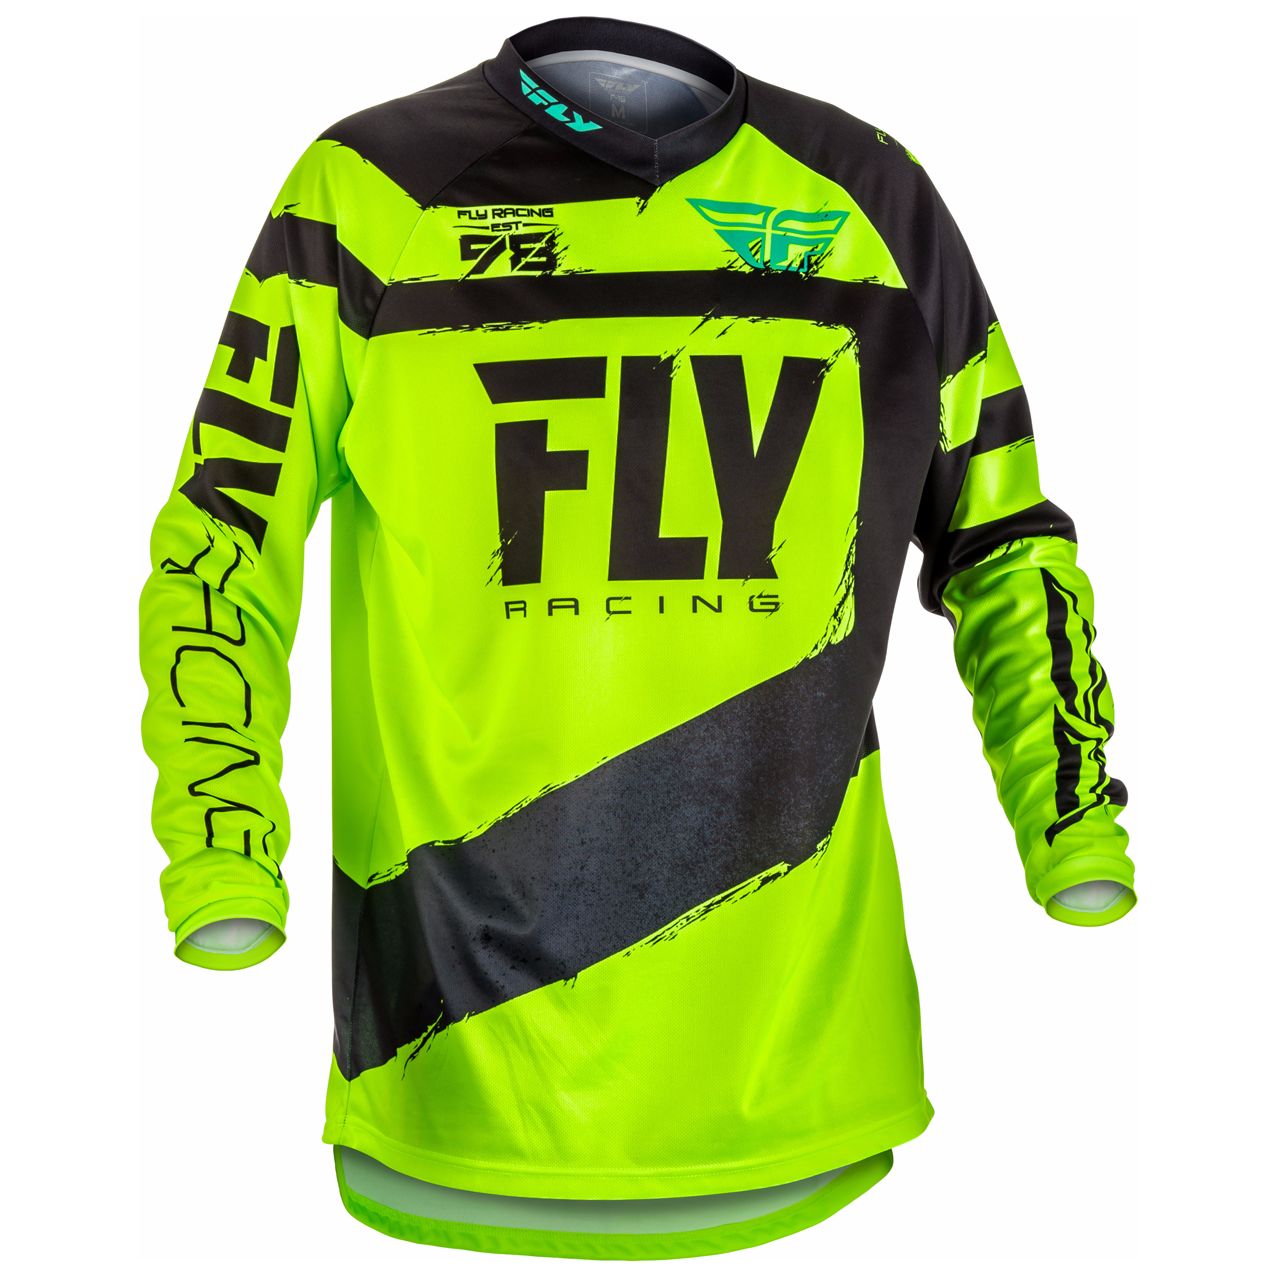 Maillot Cross Fly F16 Youth - Noir Jaune Fluo -